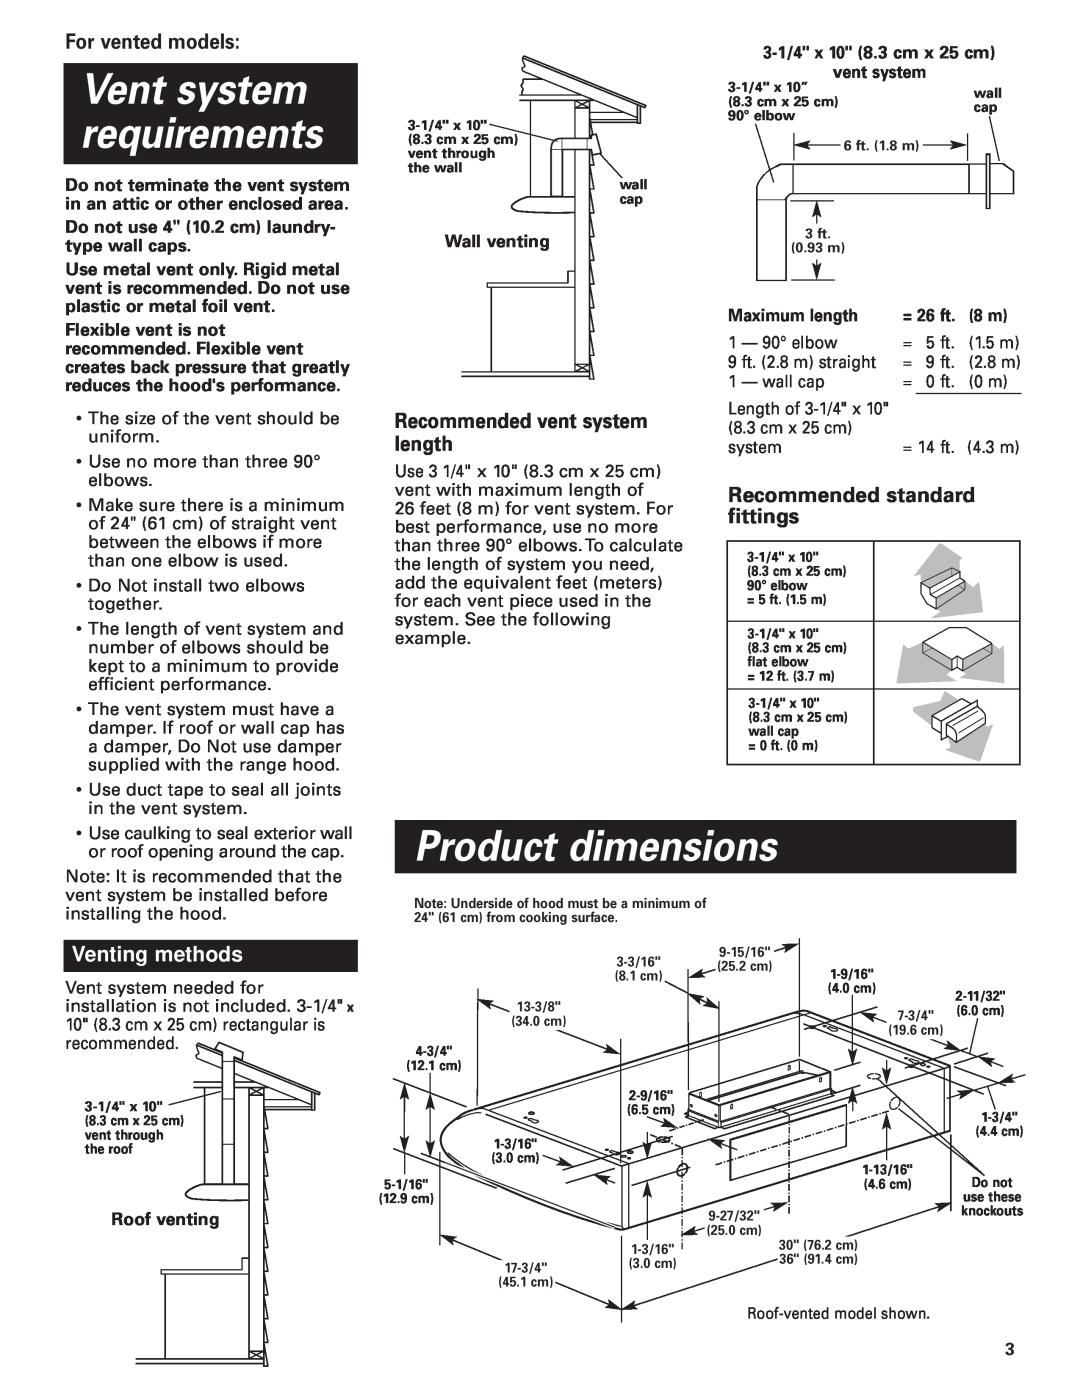 KitchenAid KHTU100 Product dimensions, Vent system requirements, For vented models, Recommended vent system length 